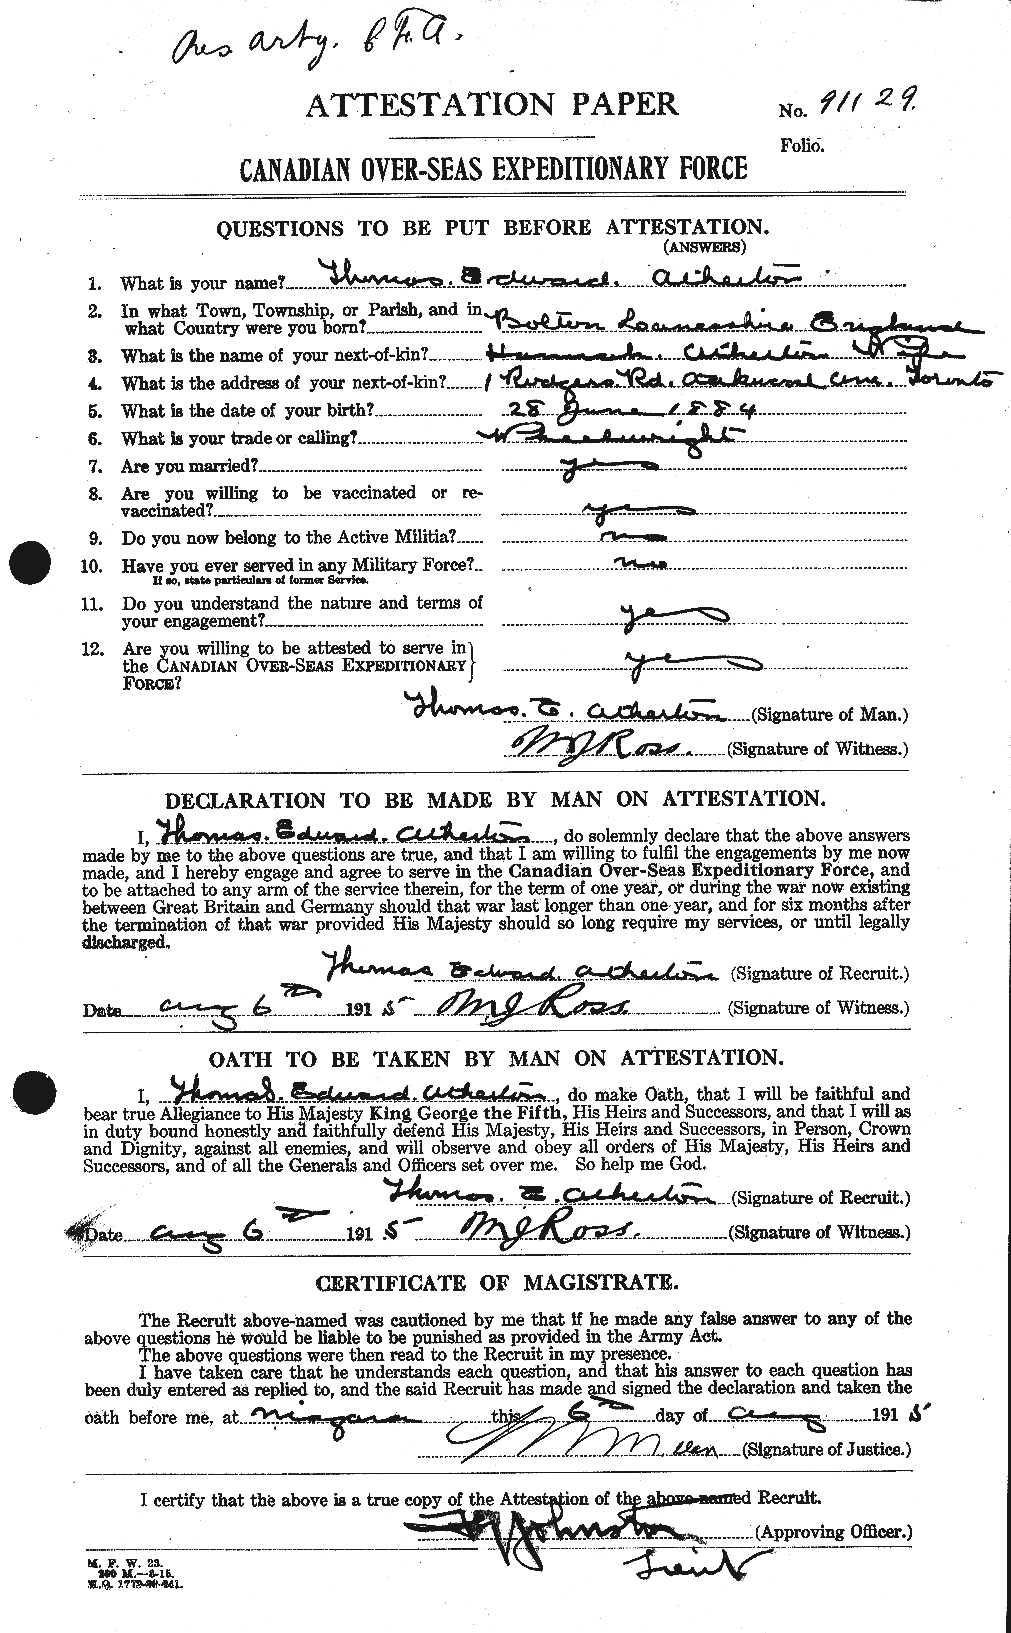 Personnel Records of the First World War - CEF 216943a